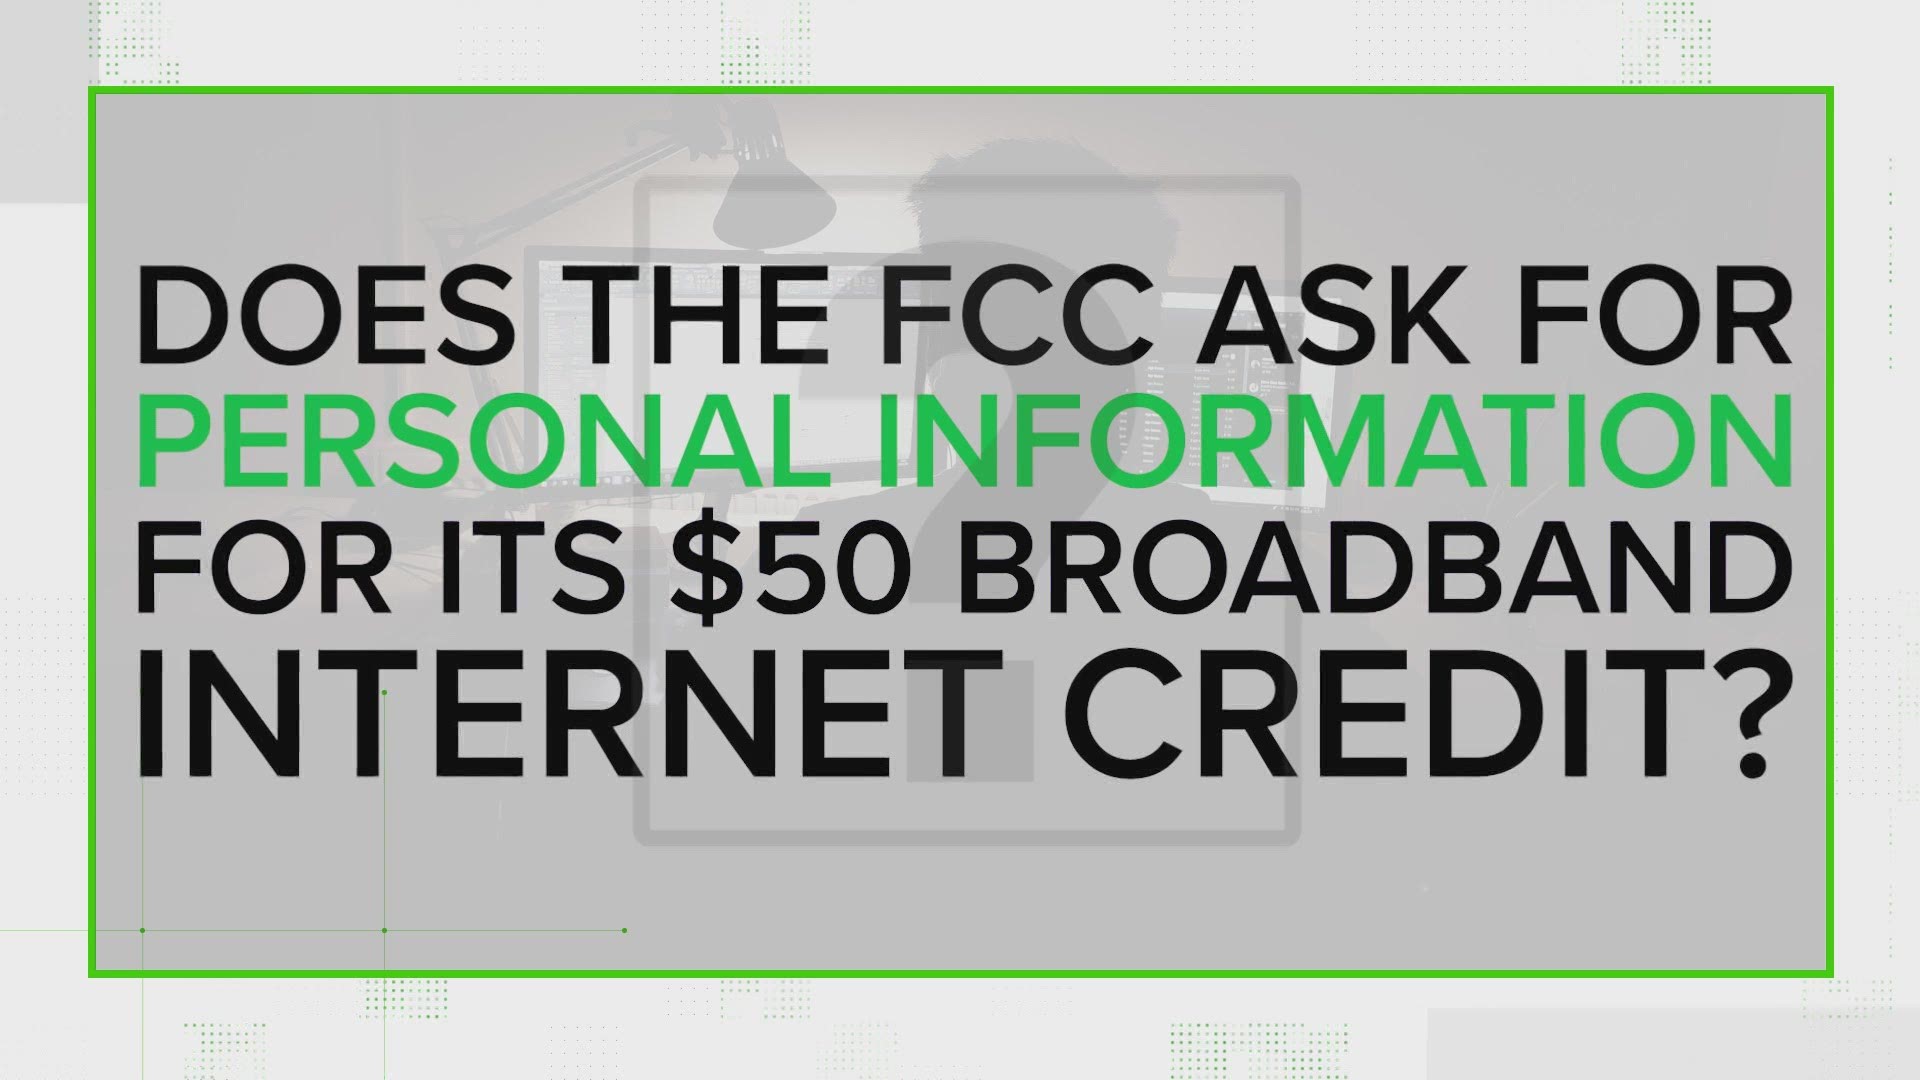 You have to have an income below $99,000 for a single filer or below $198,000 for joint filers, according to the FCC.